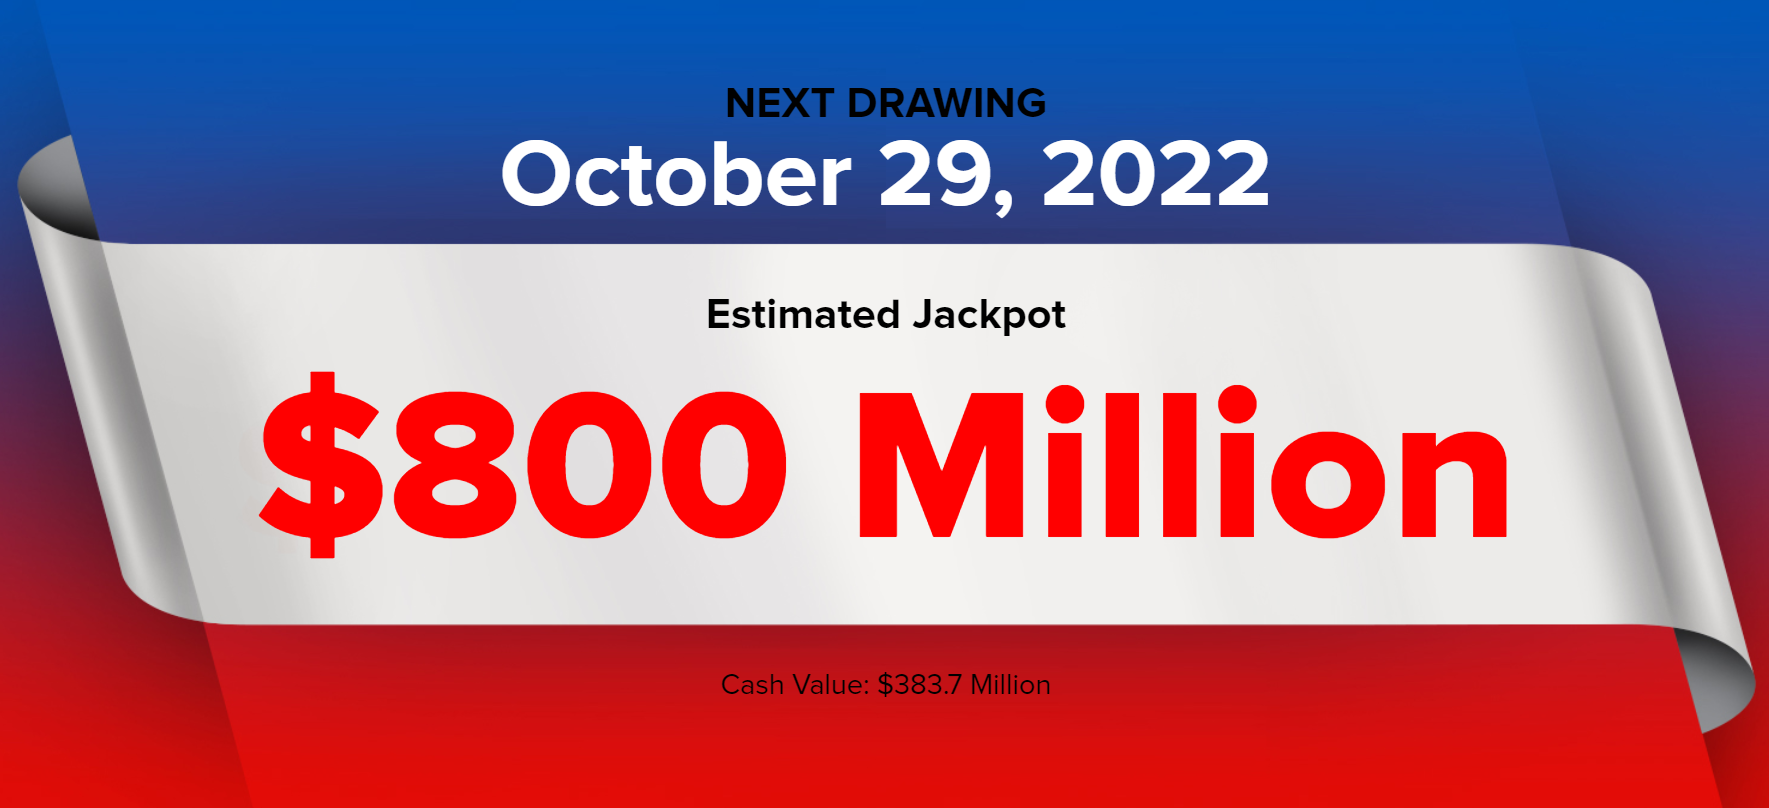 TELL YOUR RELATIVES IN THE US: No one hit Powerball jackpot, new drawing an estimated $800M